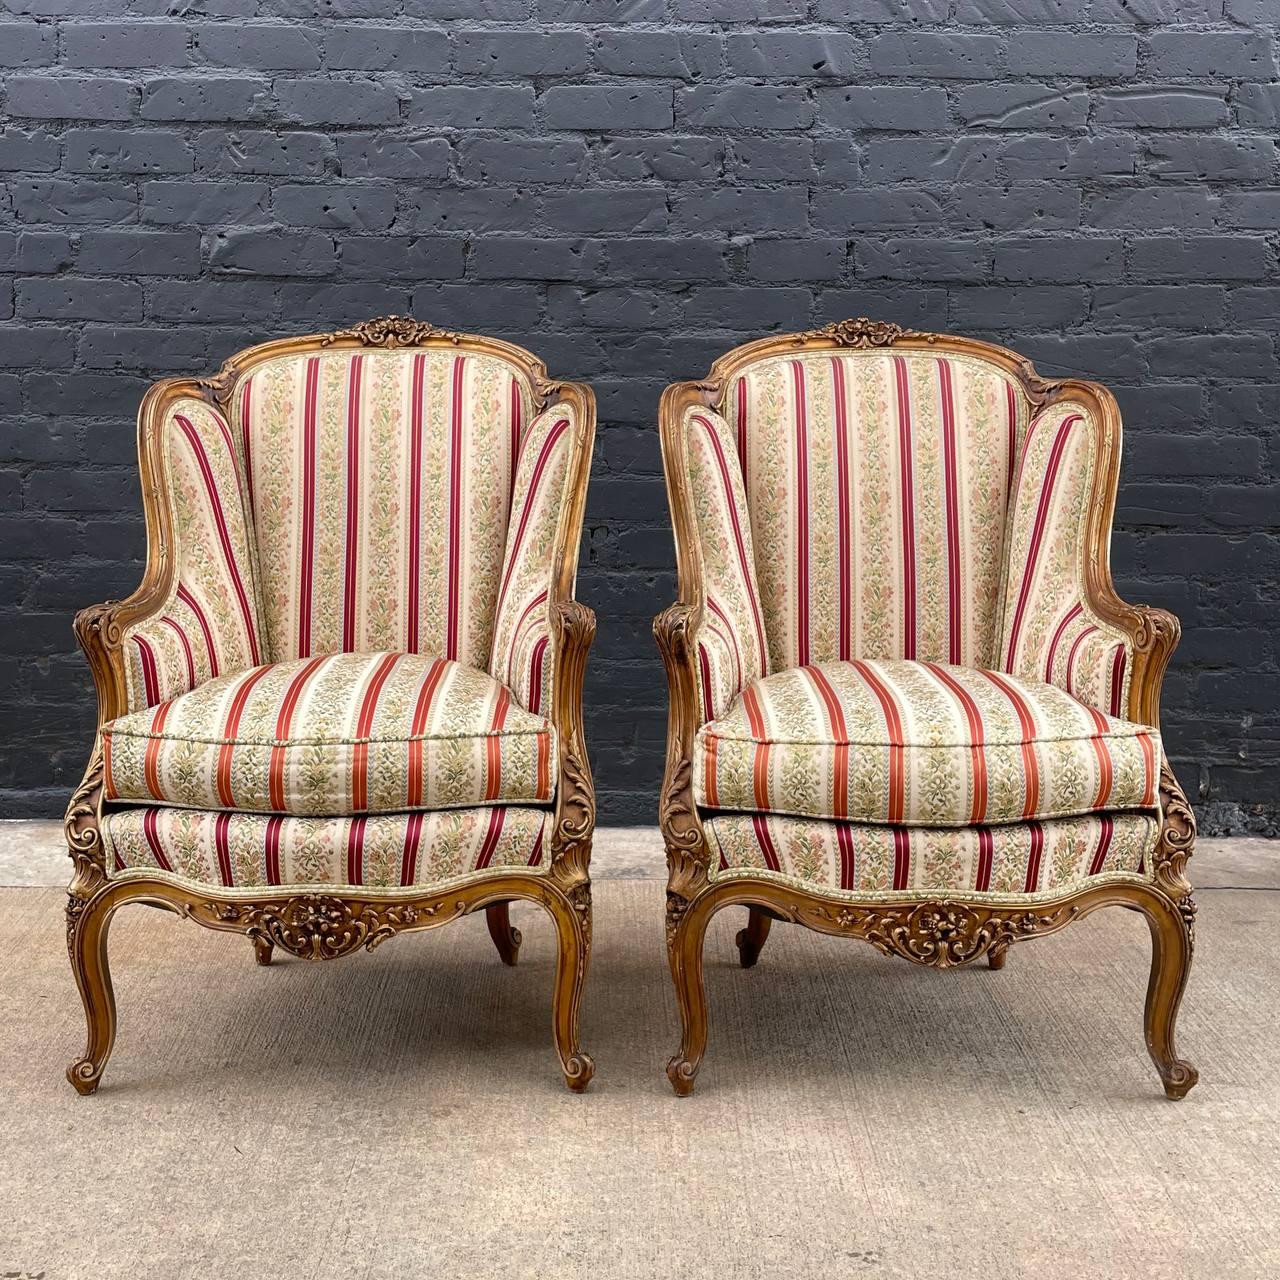 Pair French Antique Hand Carved Gilded Armchairs 

Designer: Unknown
Country: France
Manufacturer: Unknown
Materials: Guilt Wood, Original Upholstery
Style: French Antique
Year: 1920’s

$3,895 pair 

Dimensions:
43”H x 28”W x 32”D
Seat